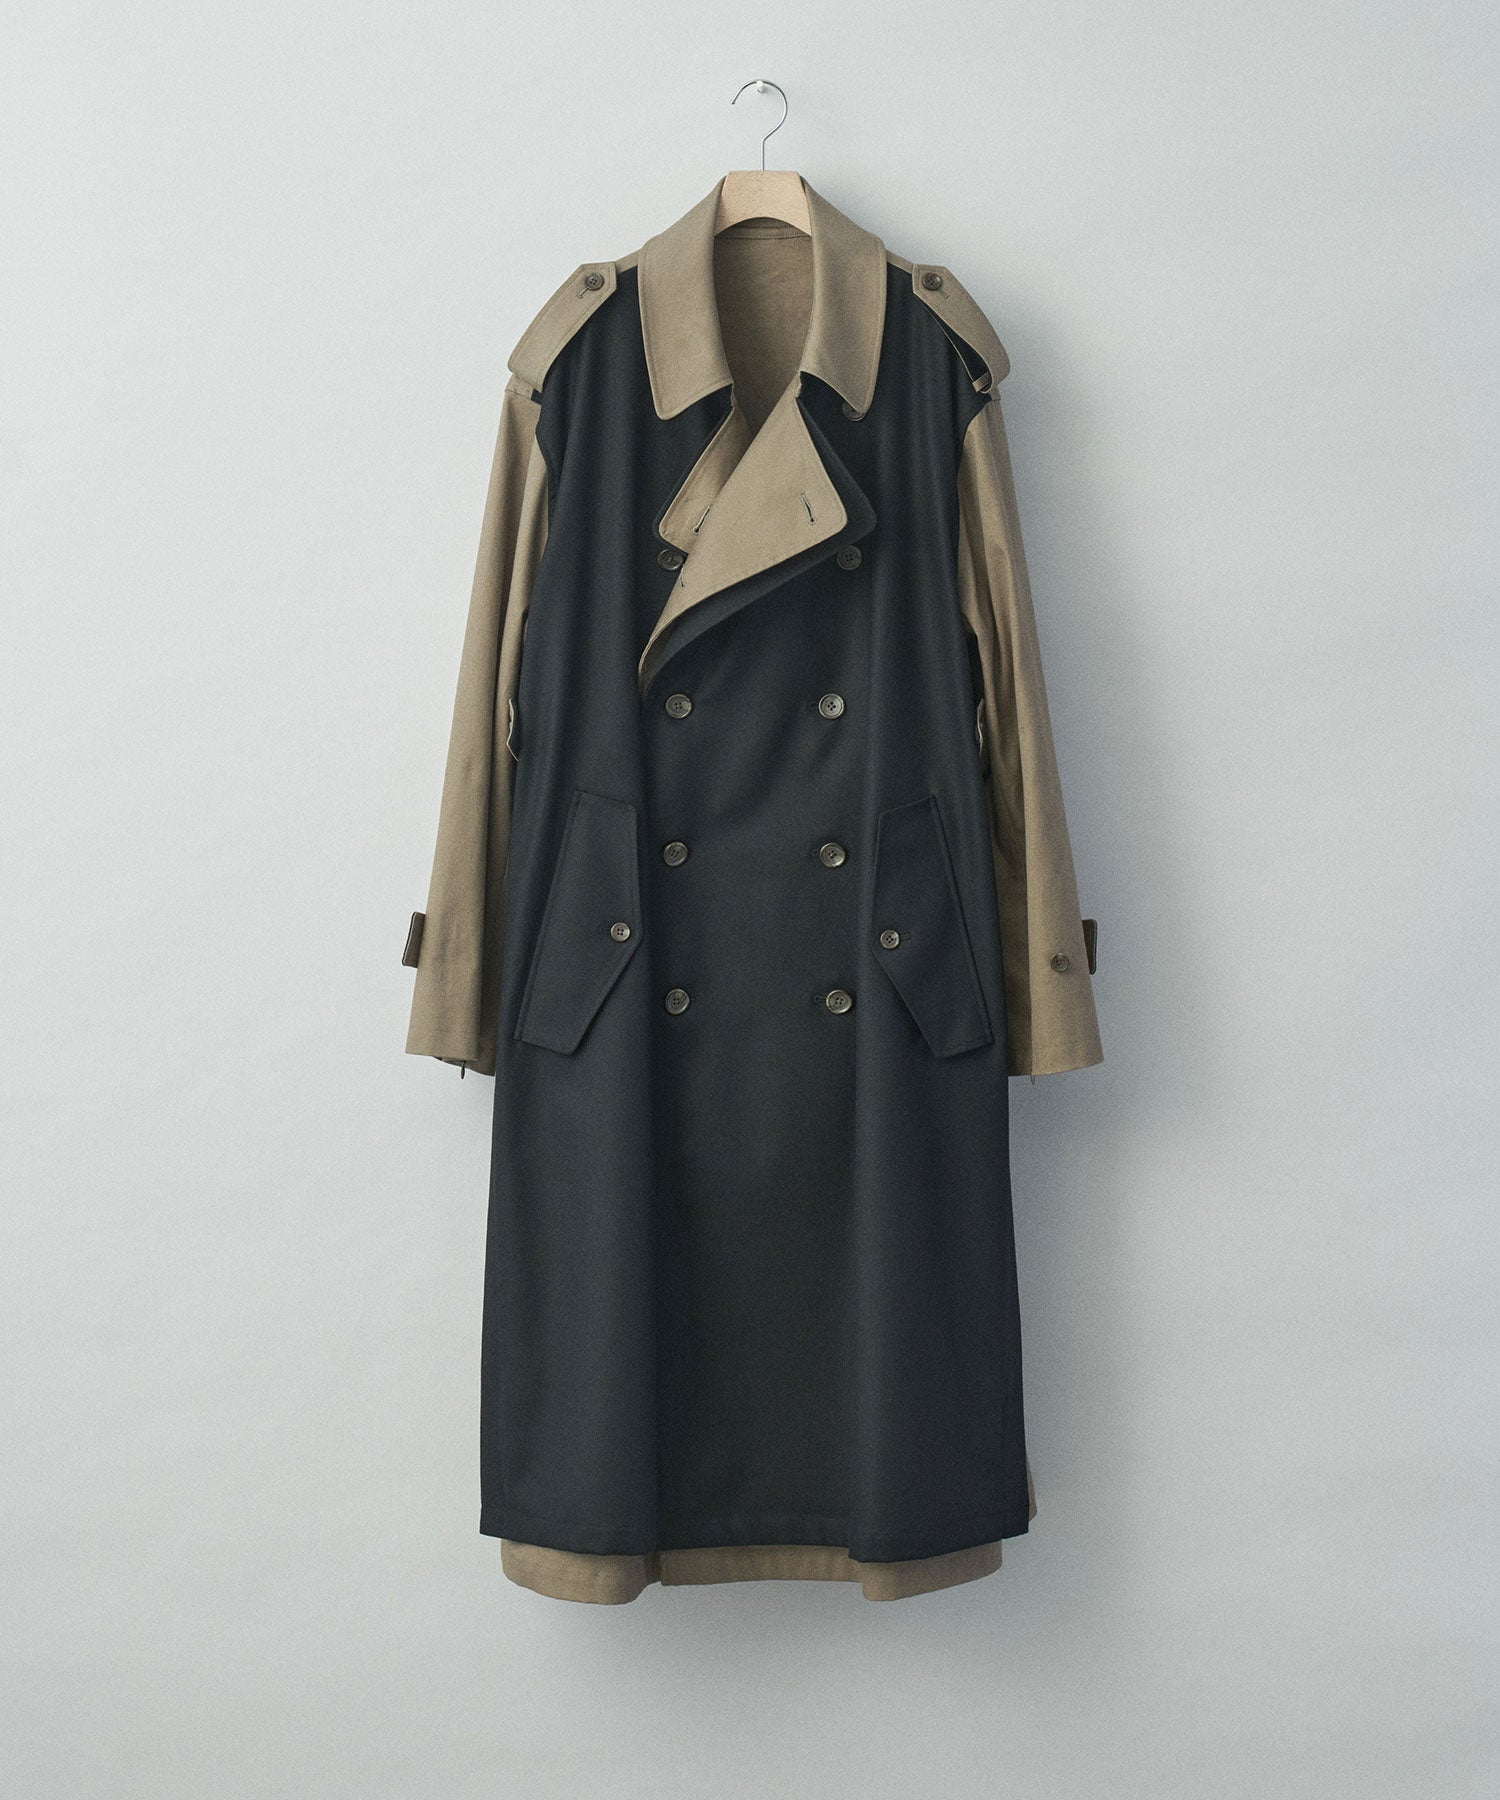 stein】OVERSIZED DOUBLE LAPELLED TRENCH COAT | 公式通販サイト ...